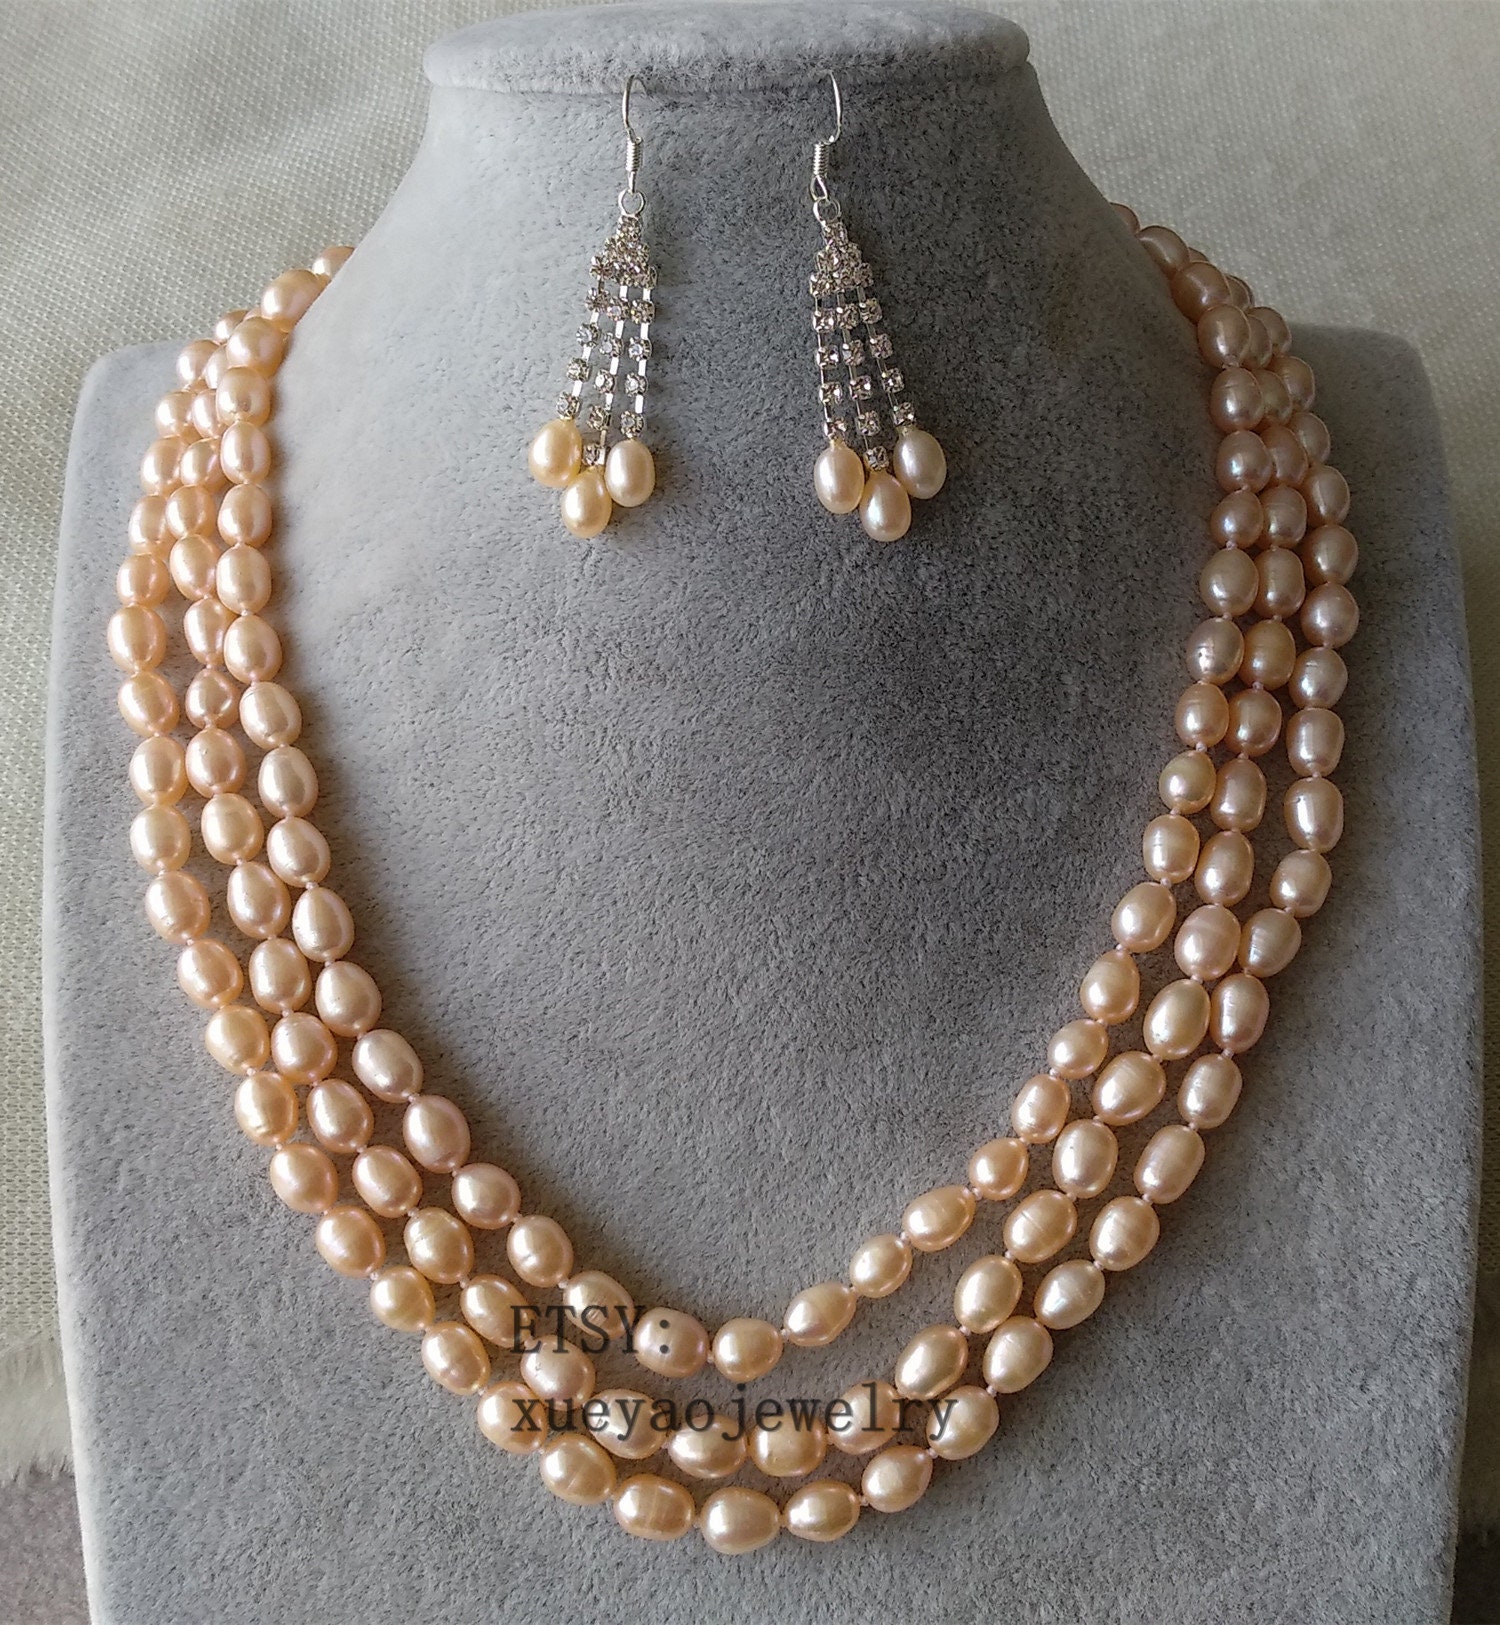 Pearl Set 3 rows 7-8 mm pink freshwater pearl necklace & | Etsy